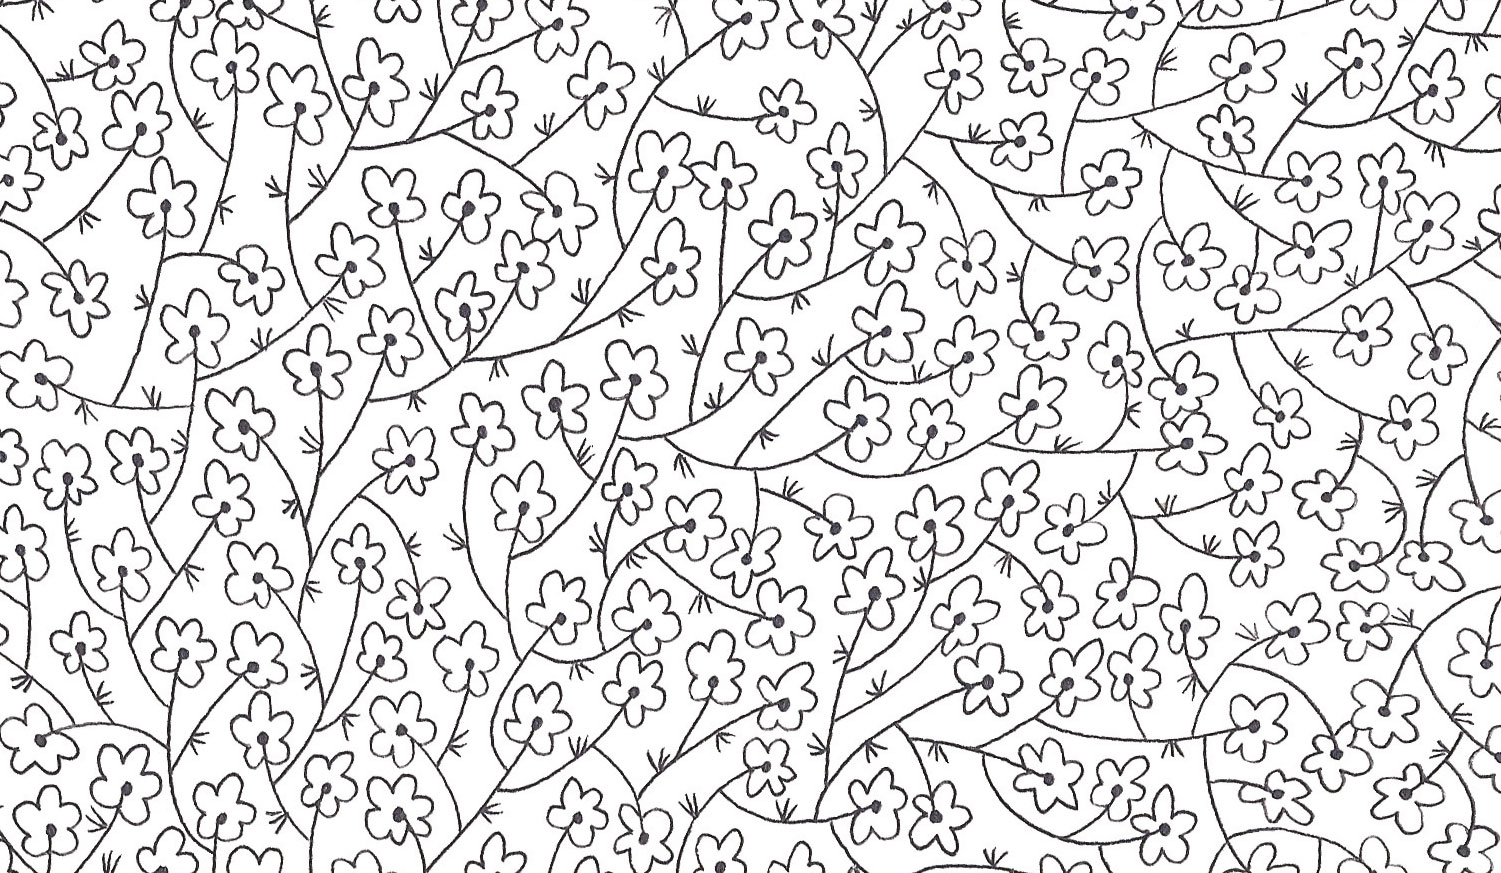 marion rousseau,happy holidays,seasons greetings,new year,bonne annee,2019,new start,happy new year,NYE,best wishes,all the best,meilleurs voeux,pattern,print and pattern,print,surface pattern,surface design,pattern design,motif,allover,freelance designer,oyeah,gif,flowers,fleurs